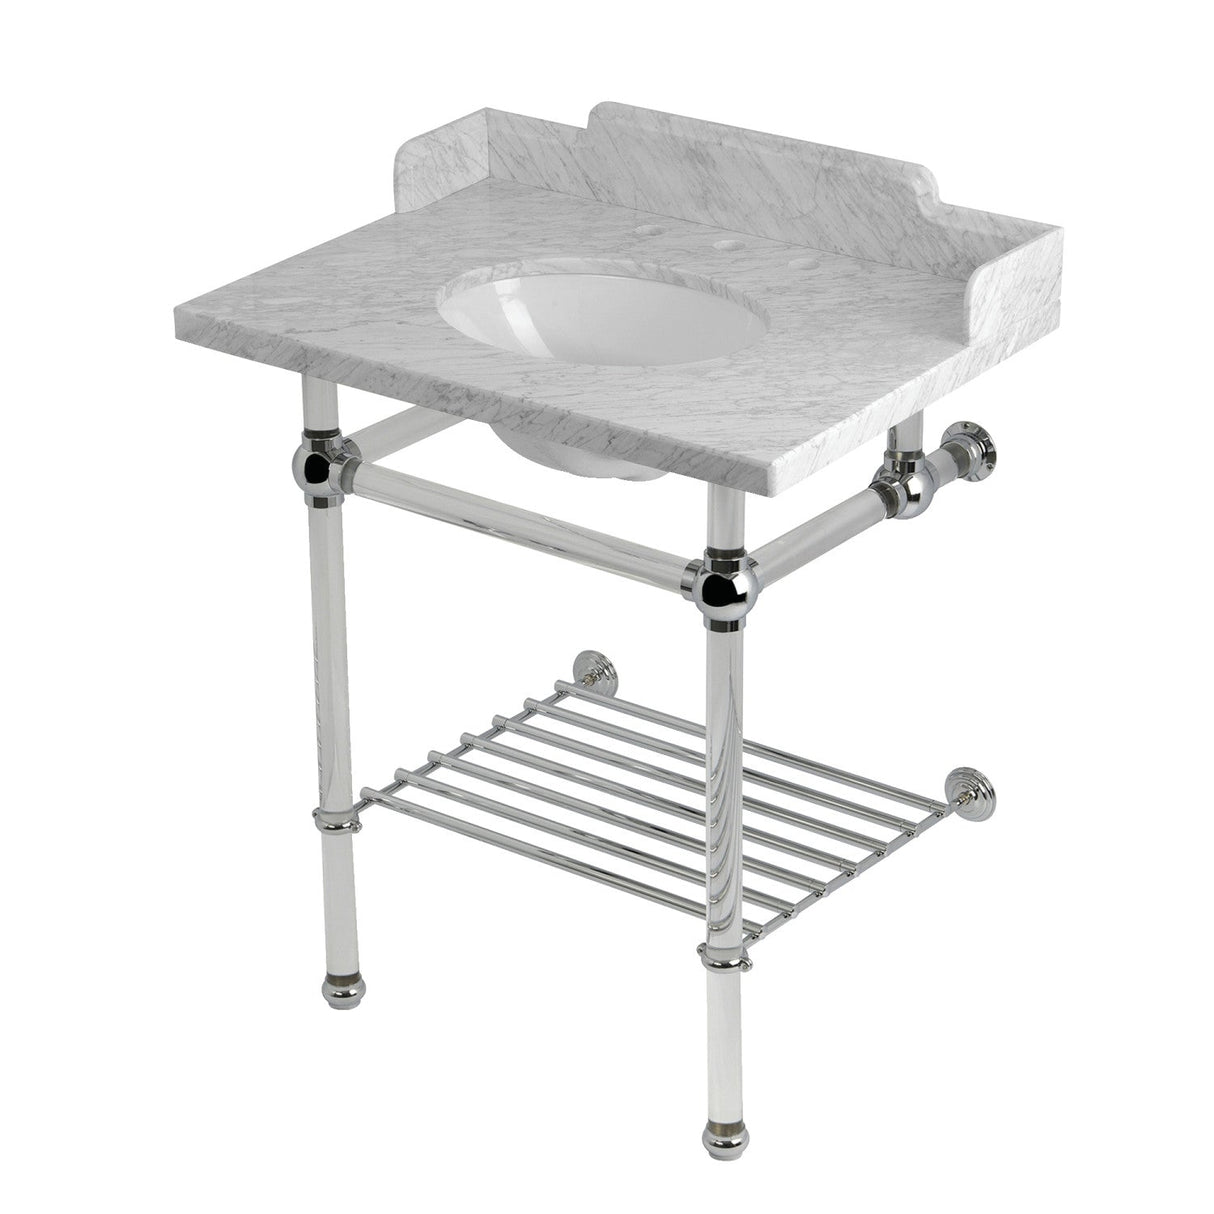 Pemberton LMS30MAB1 30-Inch Console Sink with Acrylic Legs (8-Inch, 3 Hole), Marble White/Polished Chrome